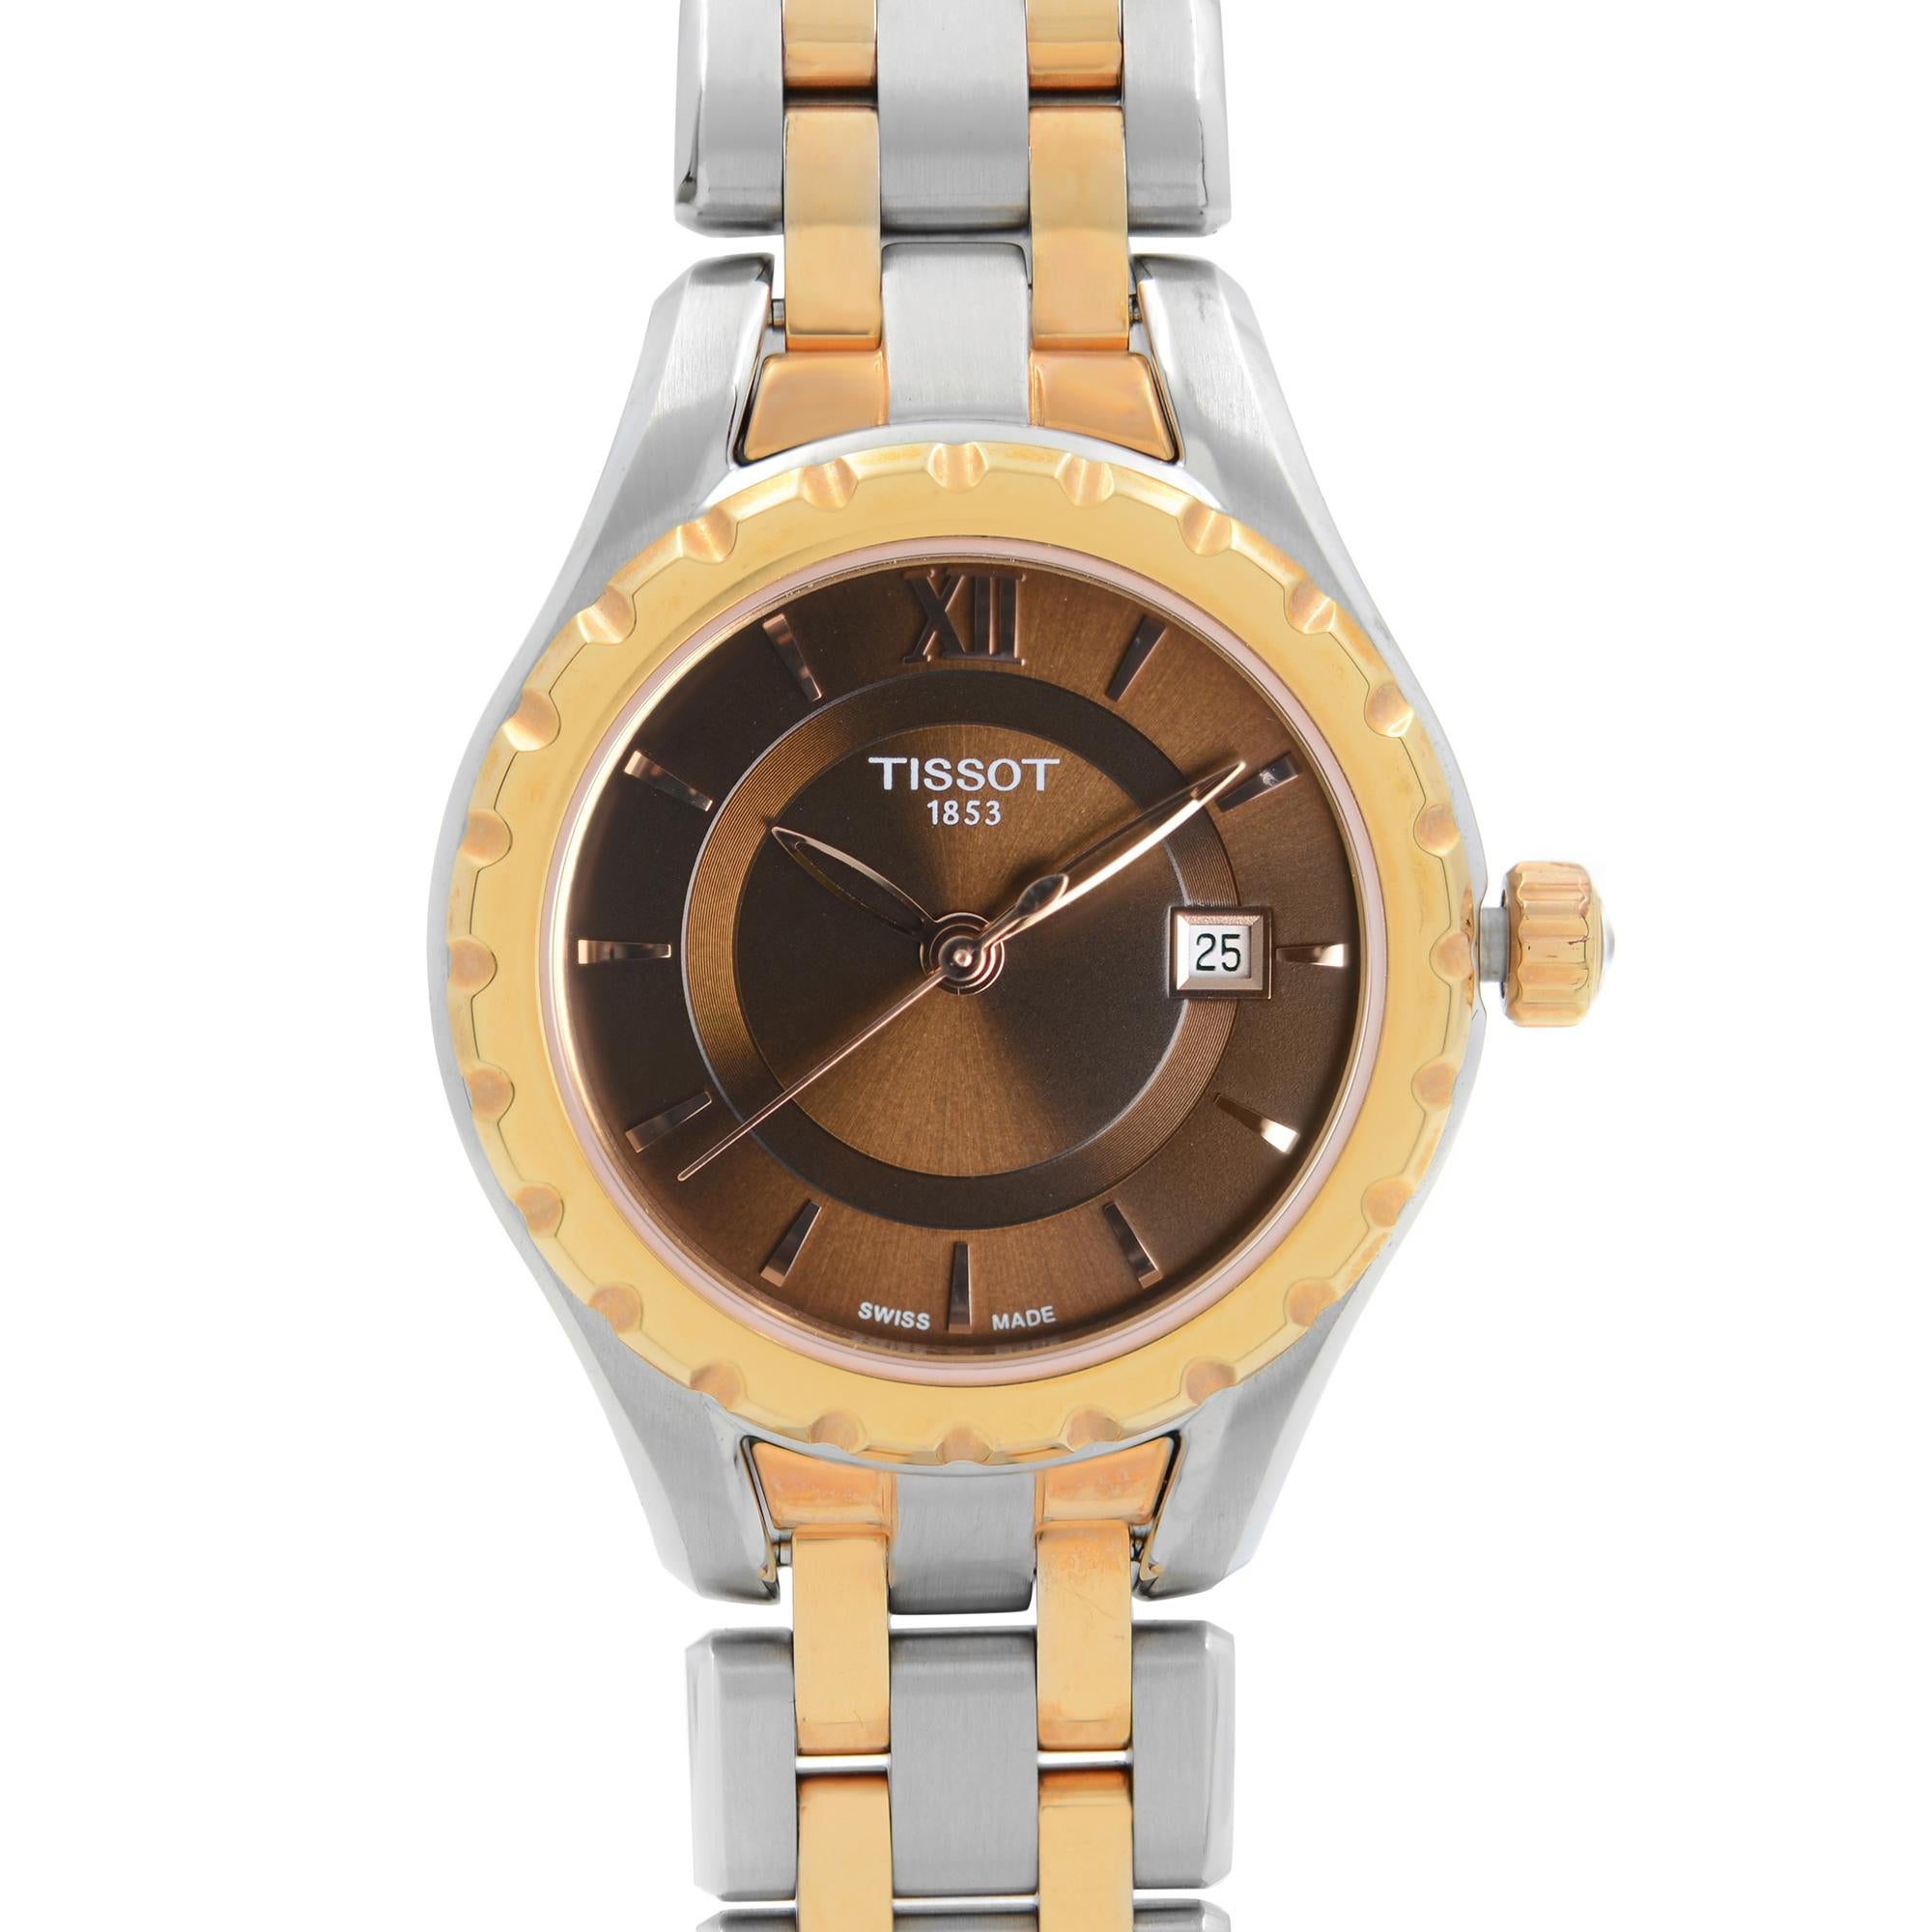 Display model Tissot T-Trend Stainless Steel Two-Tone Brown Dial Ladies Watch T072.010.22.298.00. The watch was never owned but has some insignificant hairline scratches on gold tone surfaces due to storing and handling. Original Box and Papers are